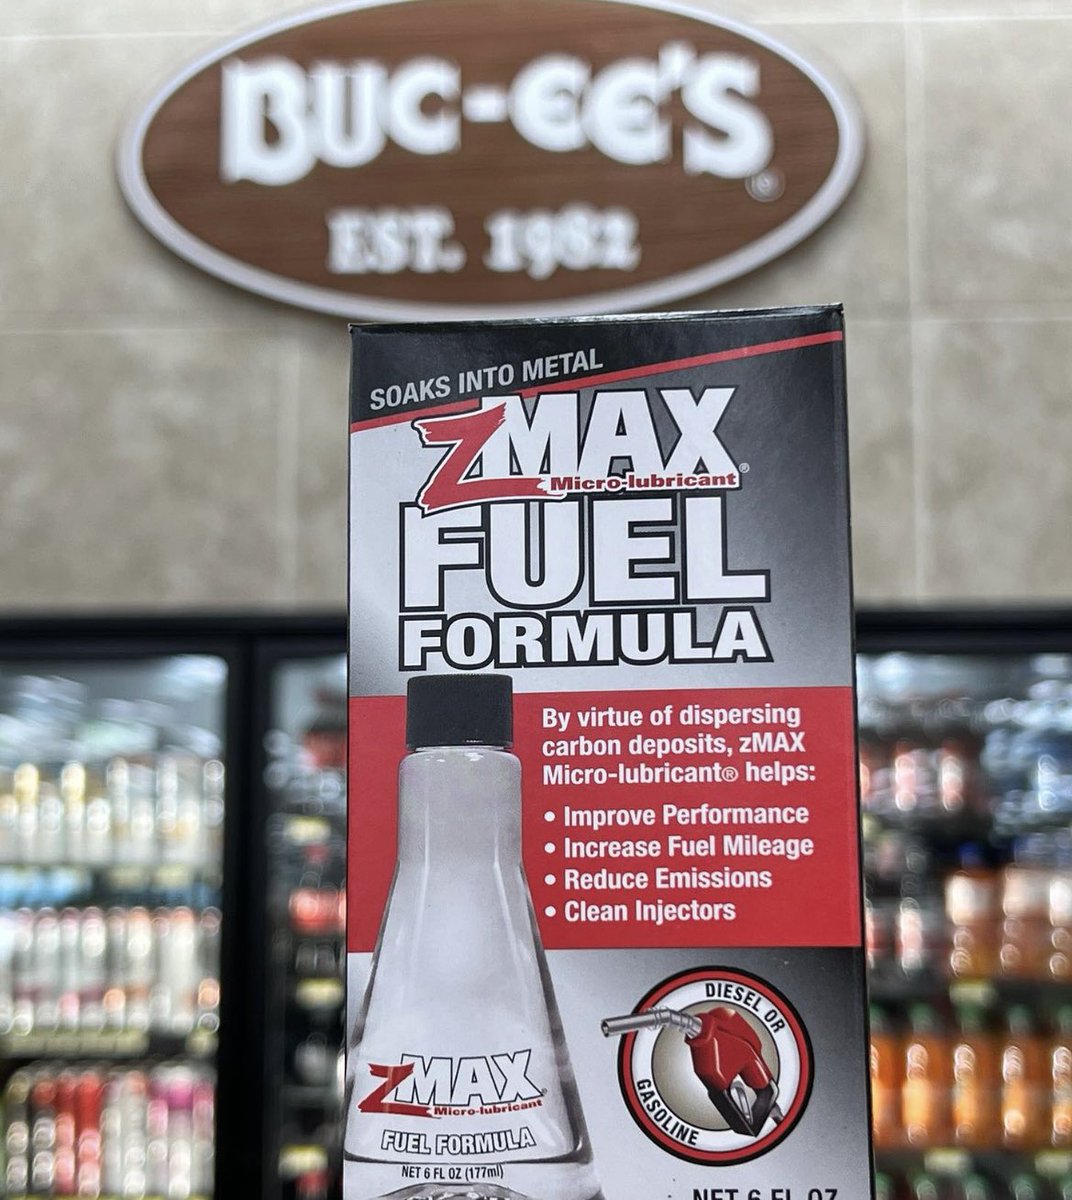 Make sure when you’re @bucees that you pick @zmaxformula your car will thank you! #zmaxmicrolubricant #bucees #getyourstoday #wevegotyoucovered